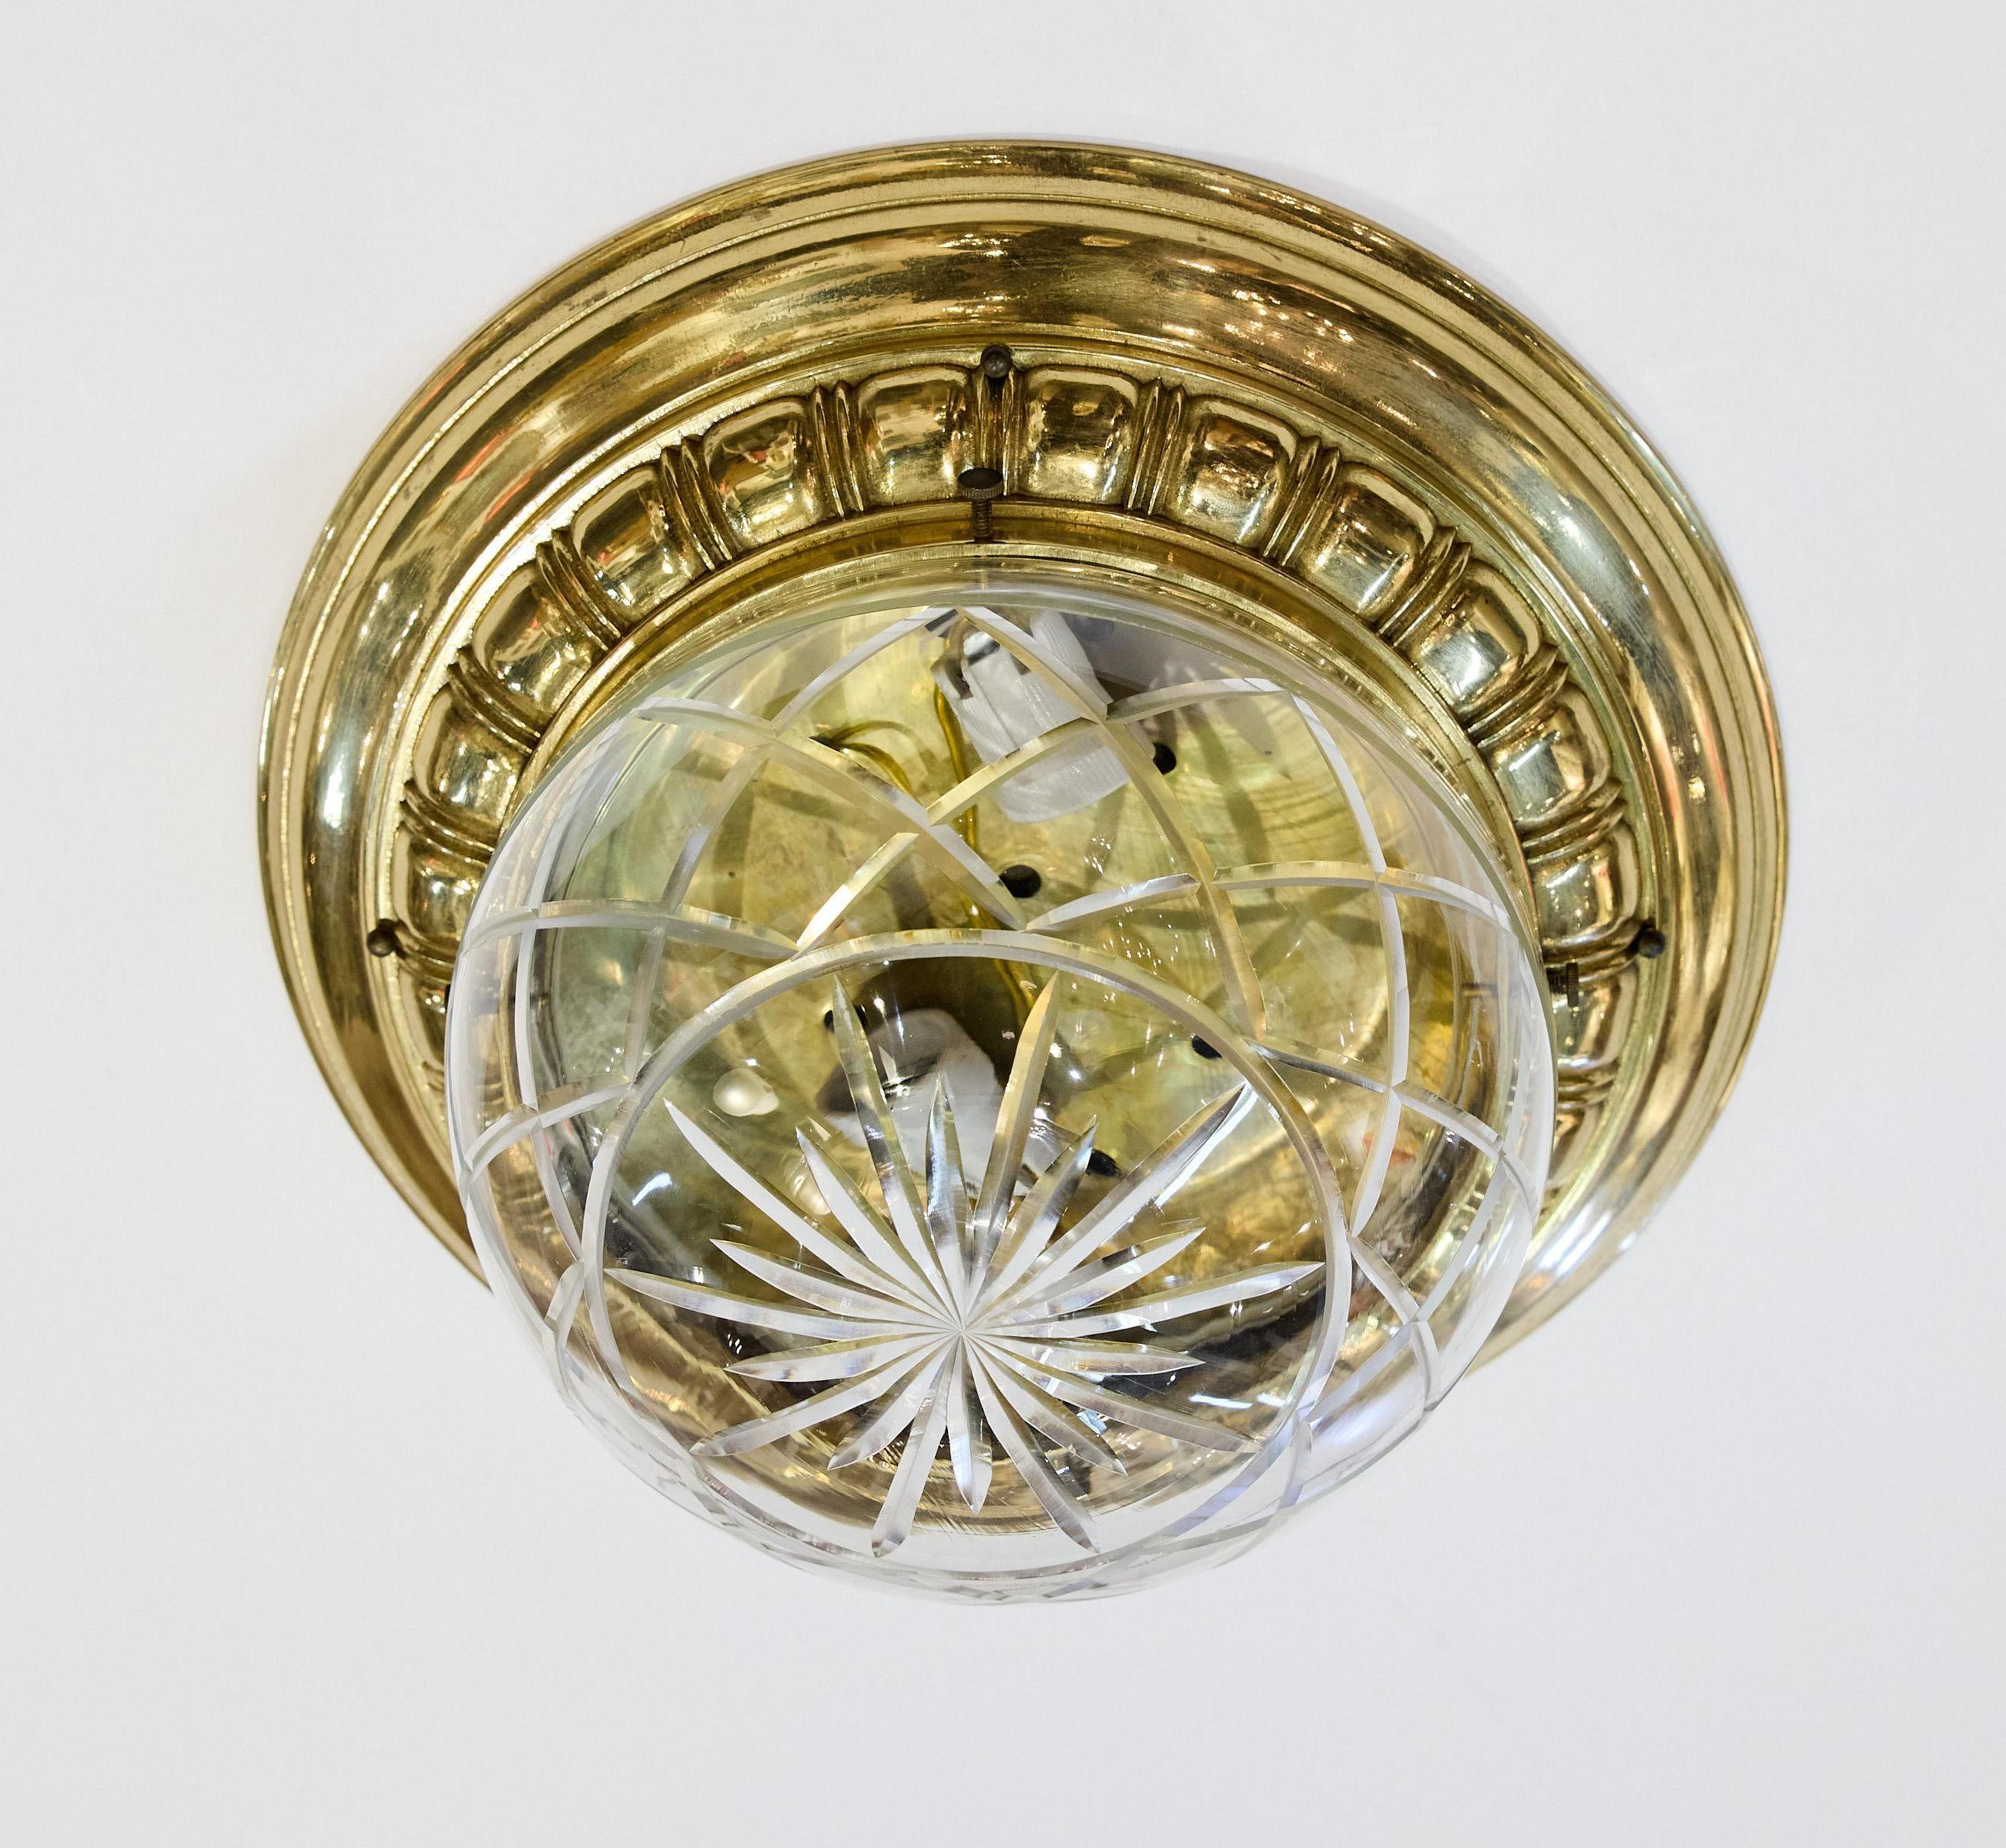 Early 20th Century fine quality Italian flush mount light fixture with a heavy decorative brass base that holds a round glass dome that is cut into a starburst in the center and surrounded by a cut-glass lattice pattern. The glass is very thick and